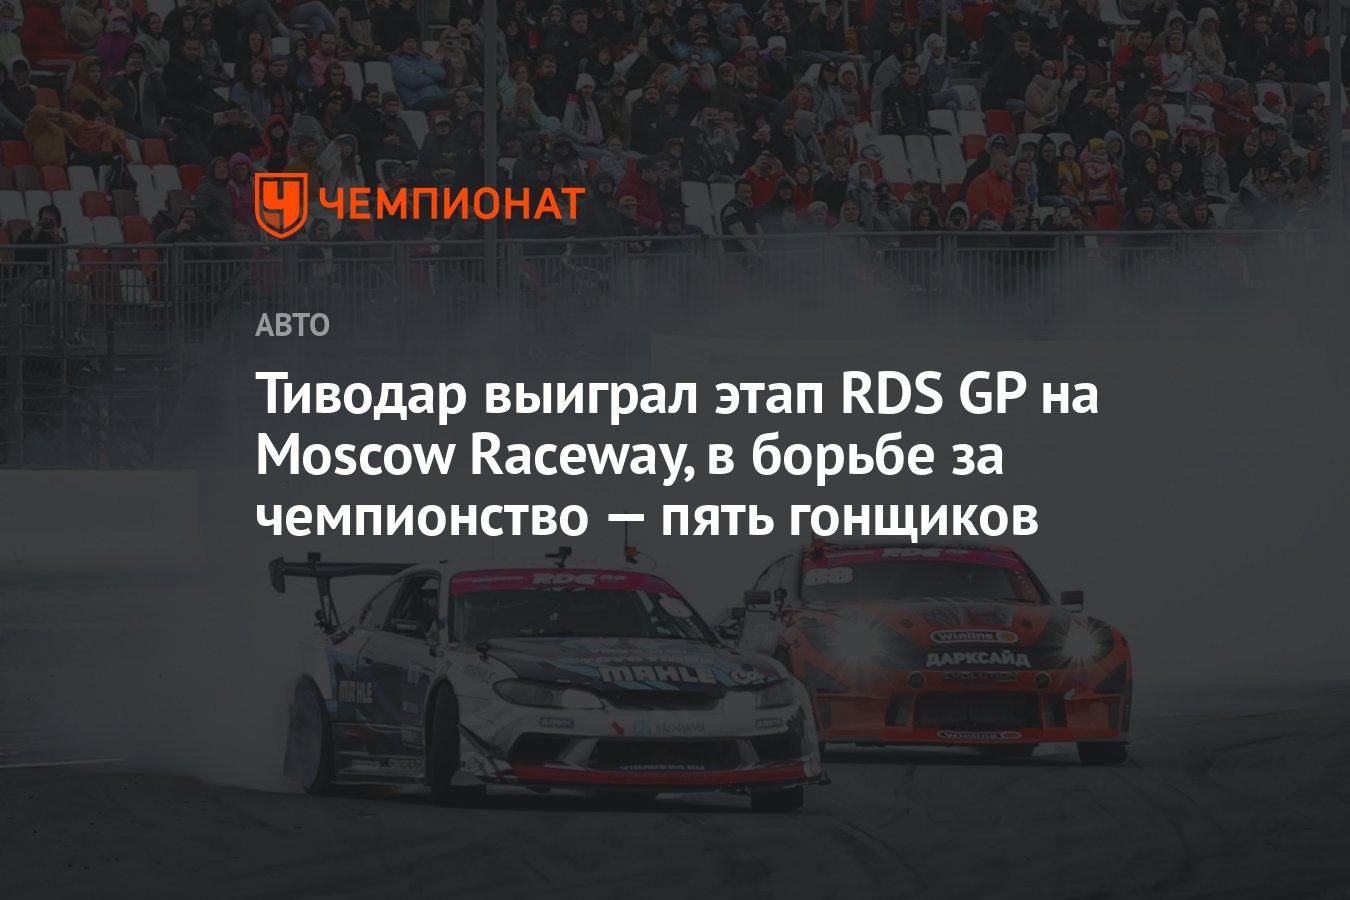 Tivodar won the RDS GP round at Moscow Raceway, five riders are in the fight for the championship (gamingdeputy.com)